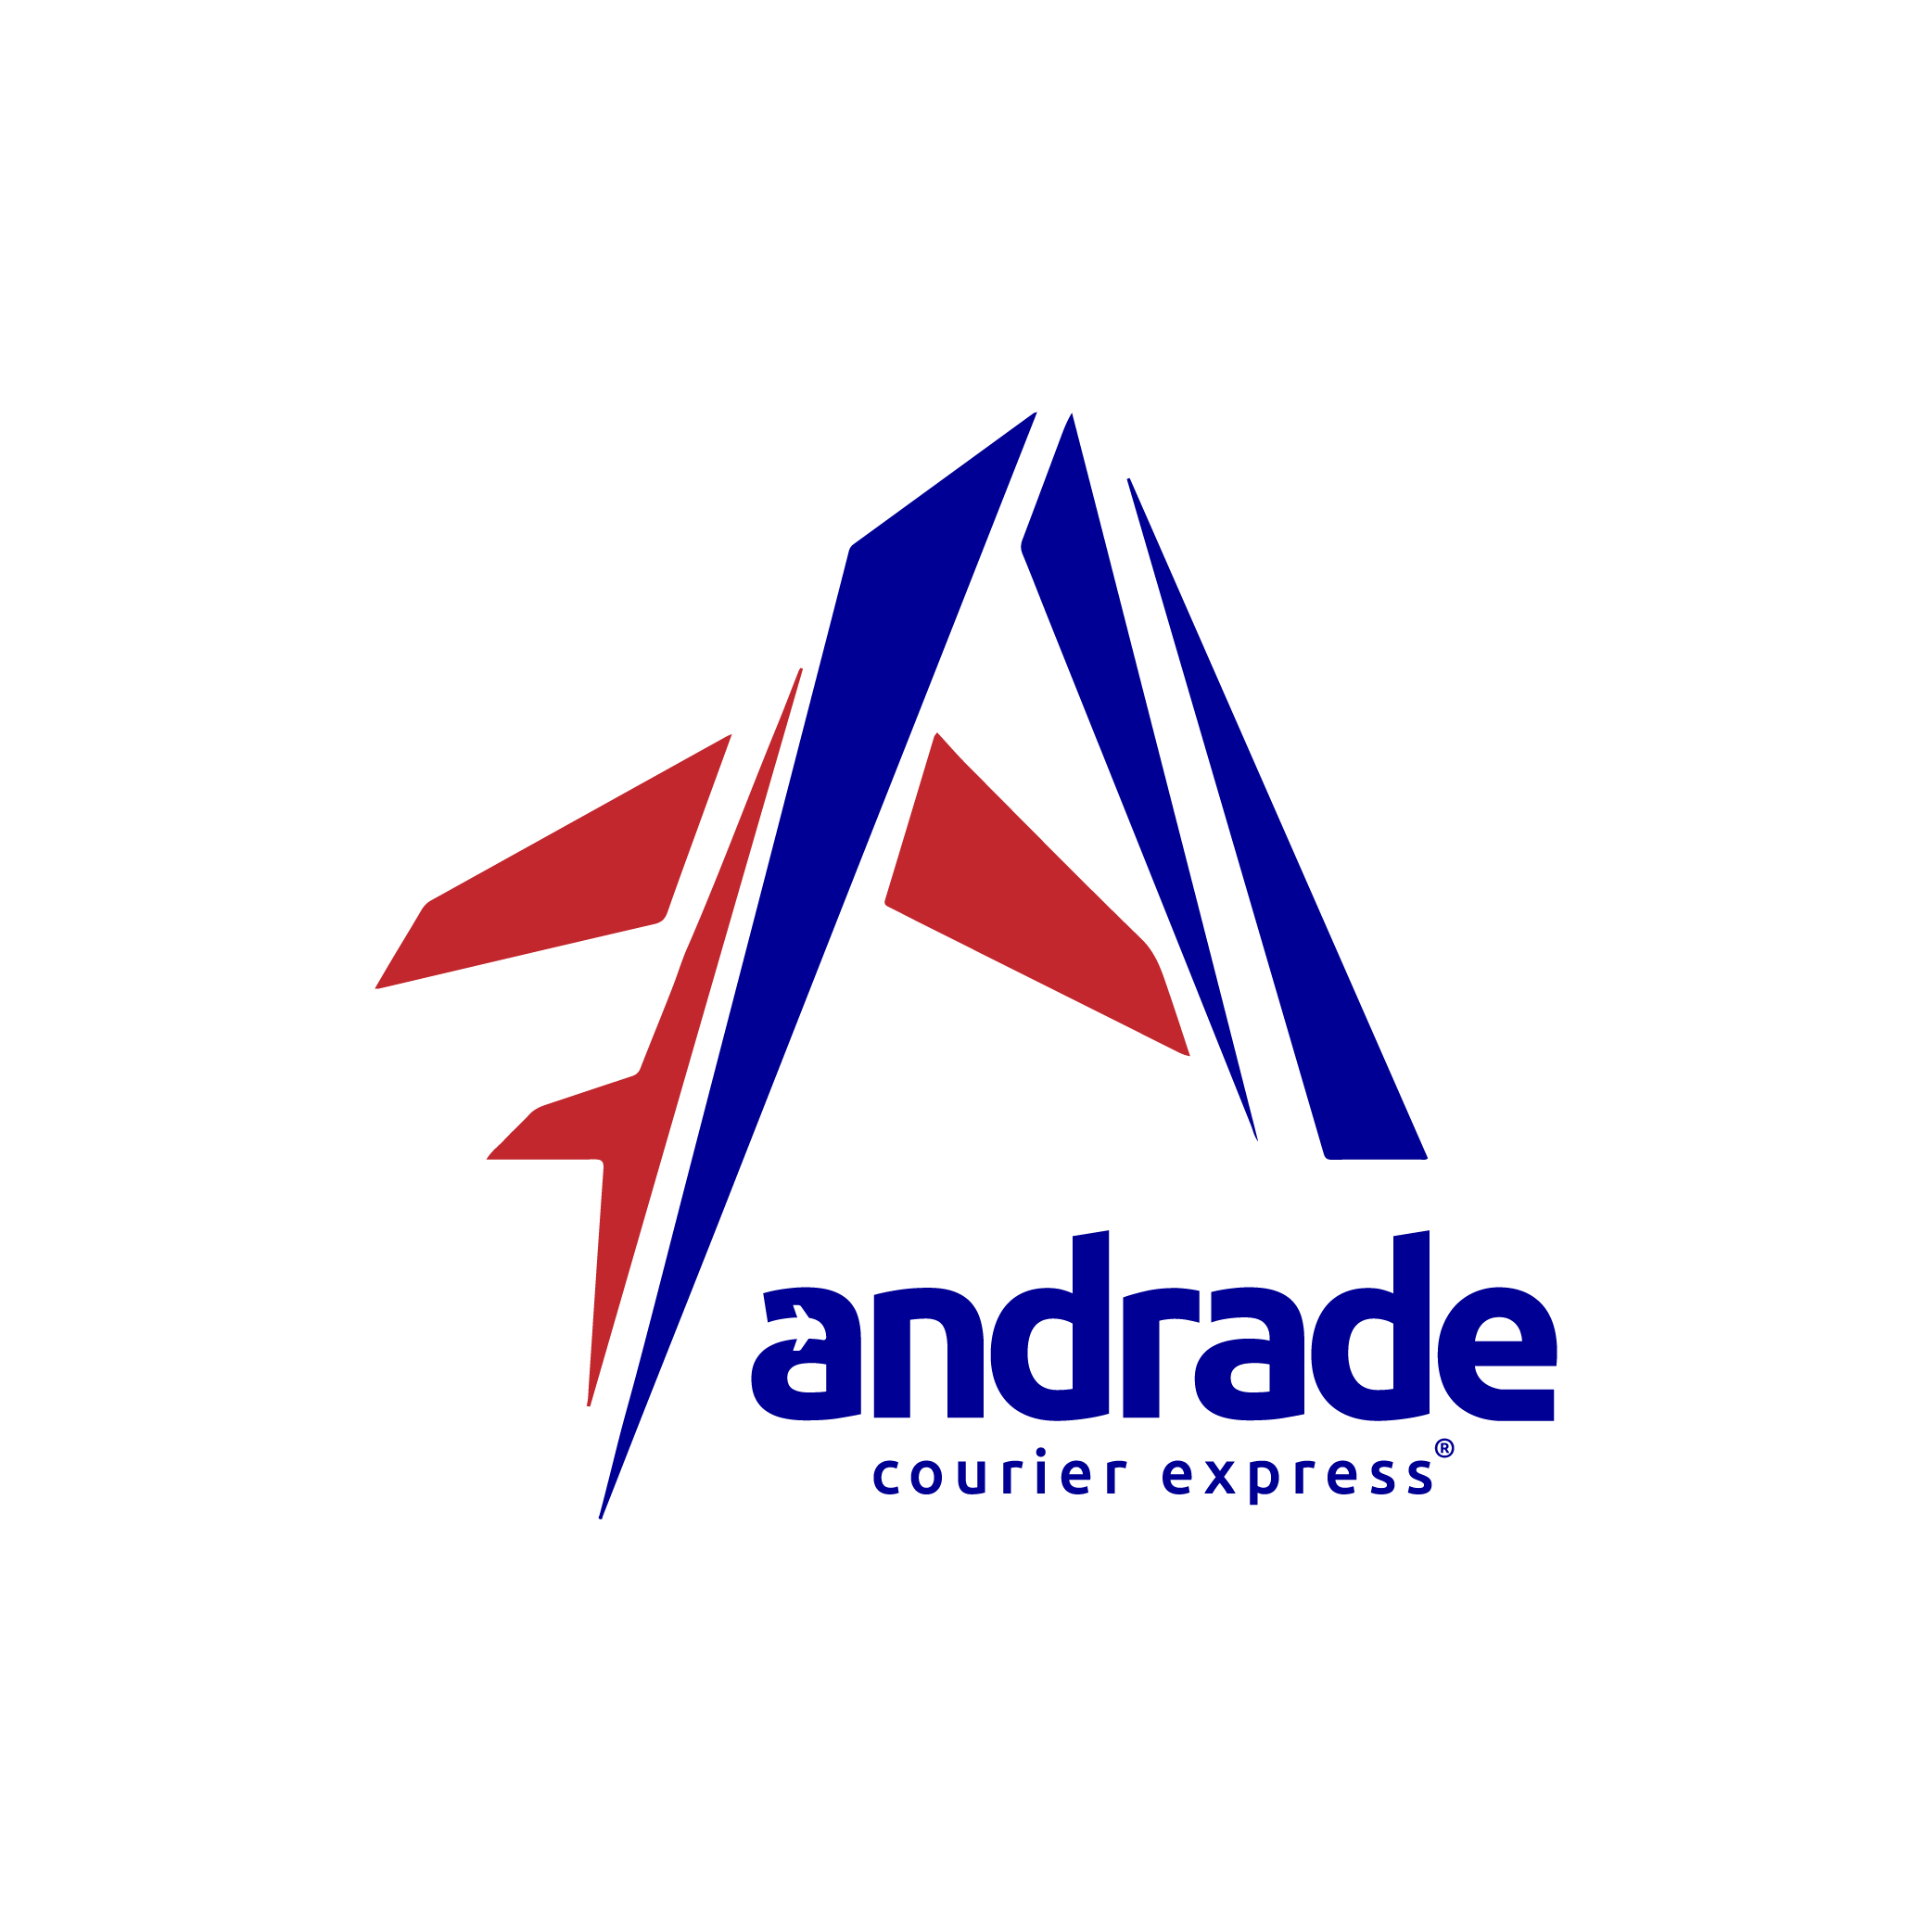 Andrade Courier Express